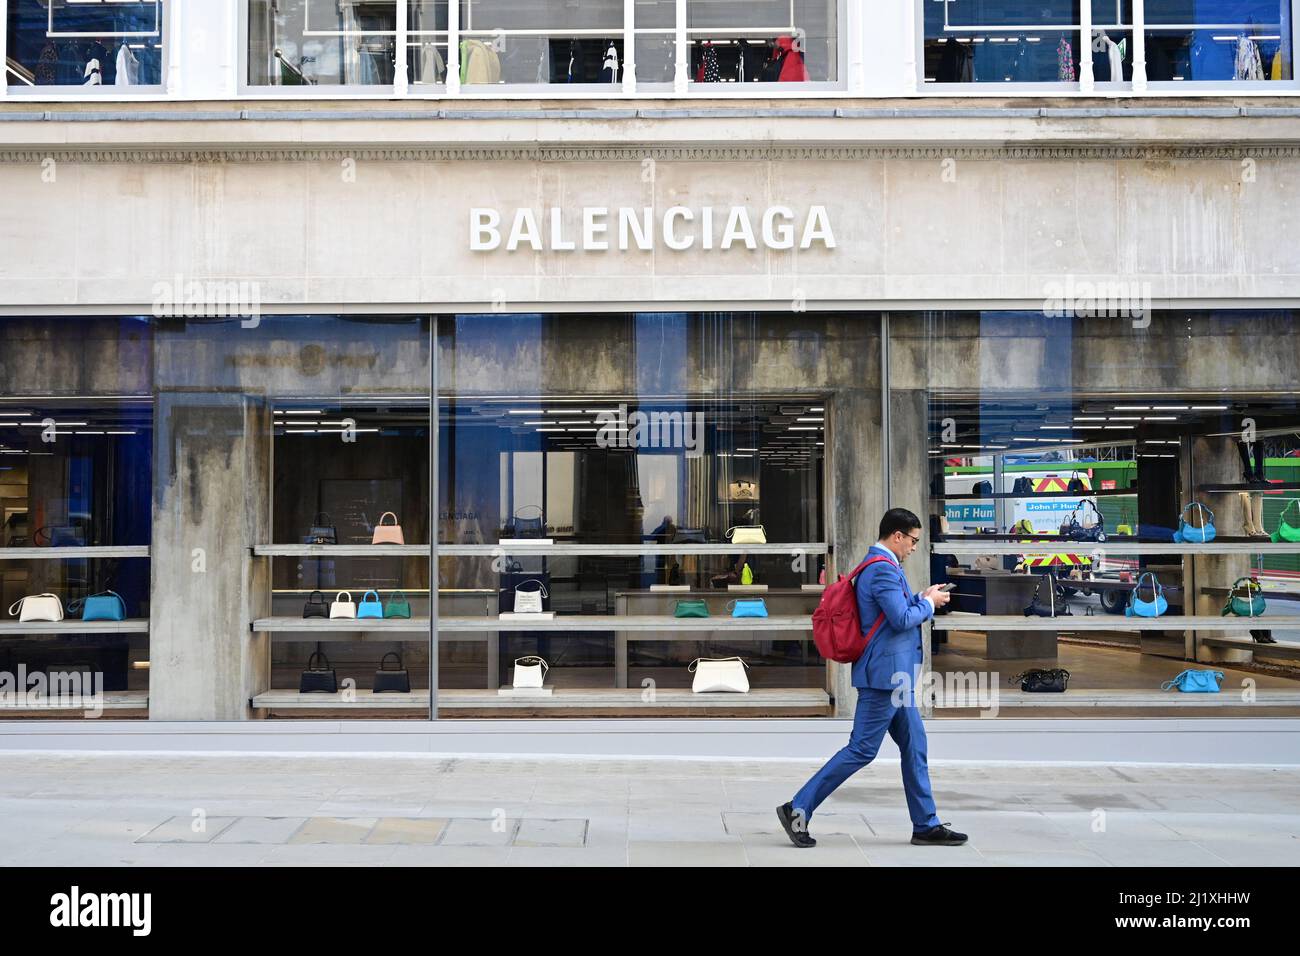 fritaget Kan Gammeldags New Bond Street, London, UK. 28 March 2022. Opening day for the new  Balenciaga flagship store with concrete Brutalist architectural style.  Credit: Malcolm Park/Alamy Live News Stock Photo - Alamy